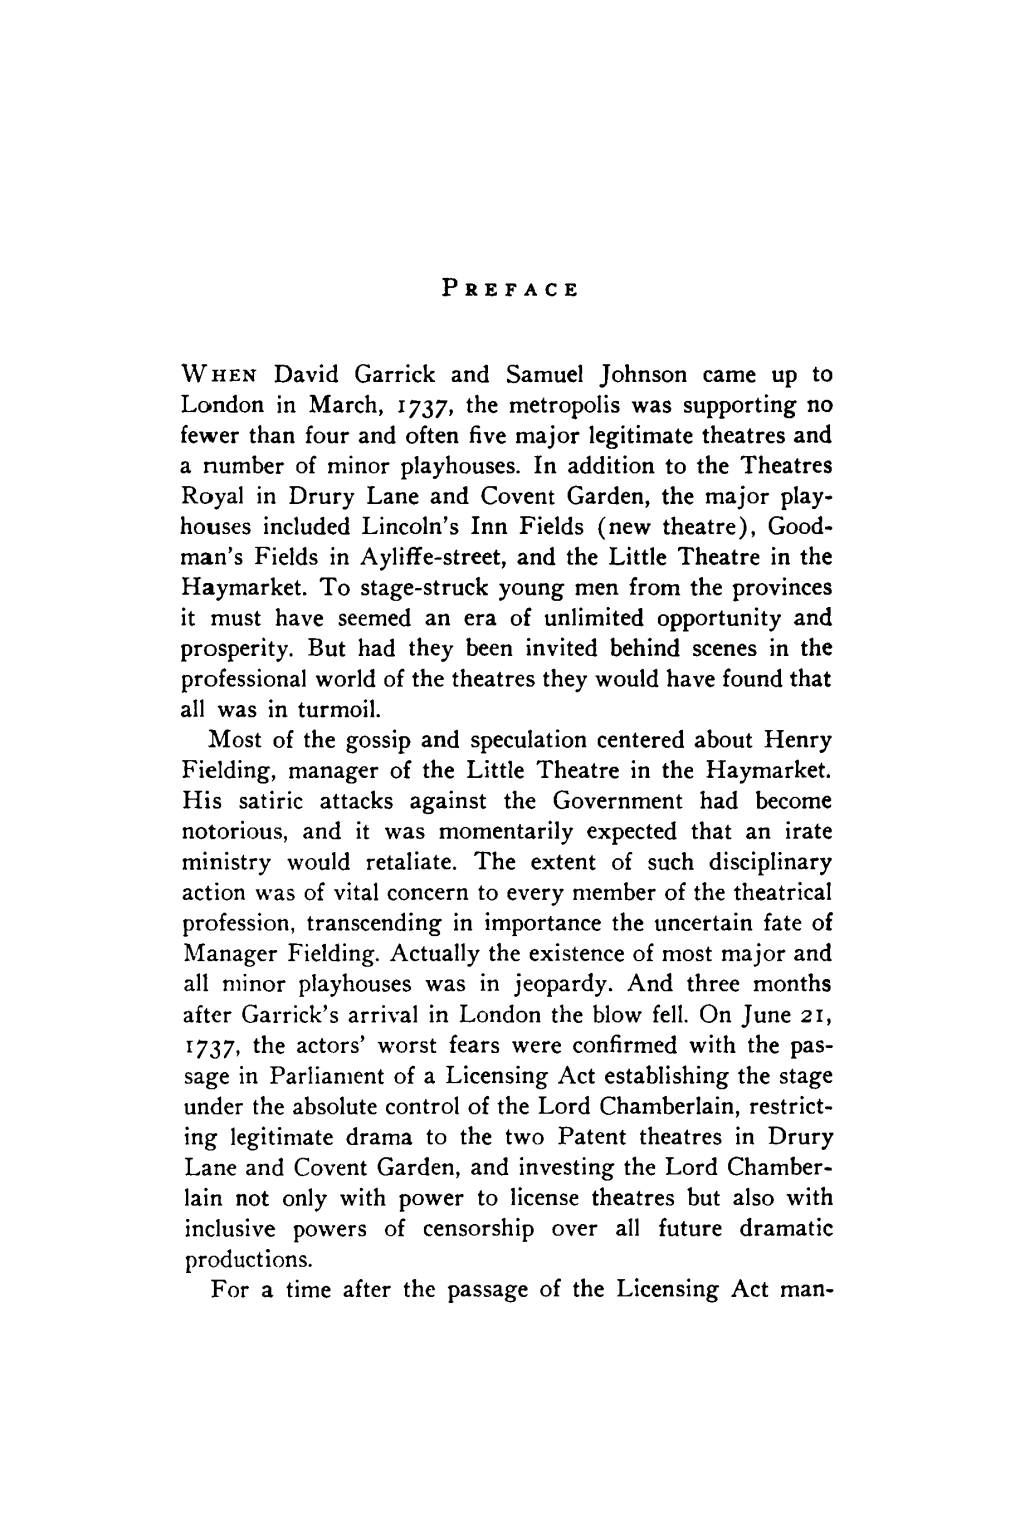 WHEN David Garrick and Samuel Johnson Came up to London In